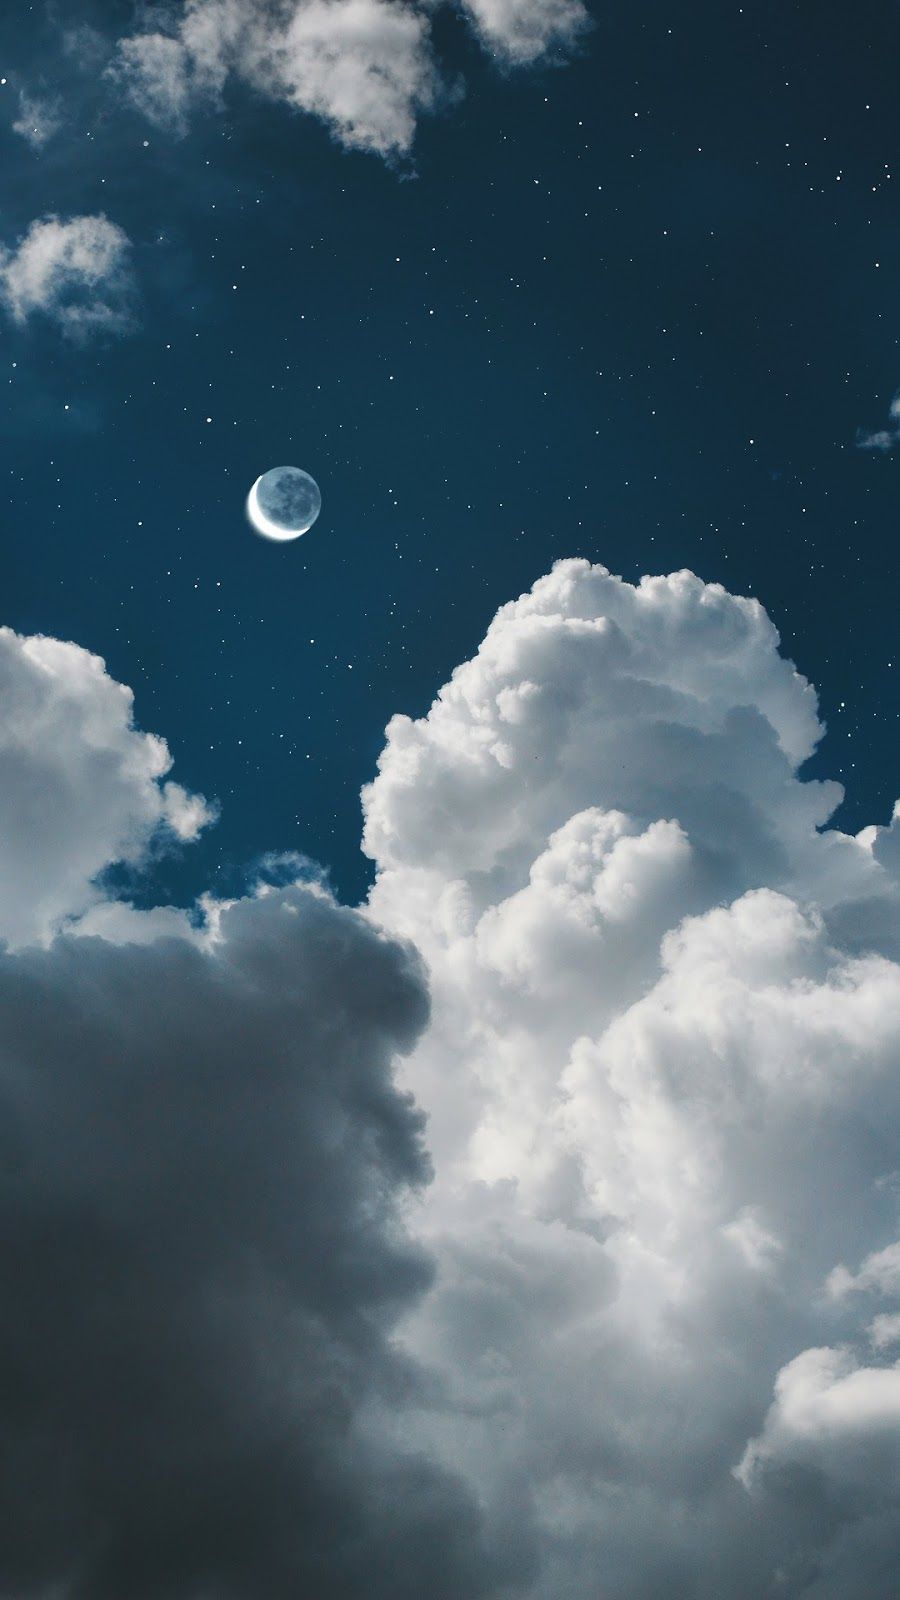 Two moon #wallpaper #iphone #android. Cloud wallpaper, Night sky wallpaper, Nature wallpaper